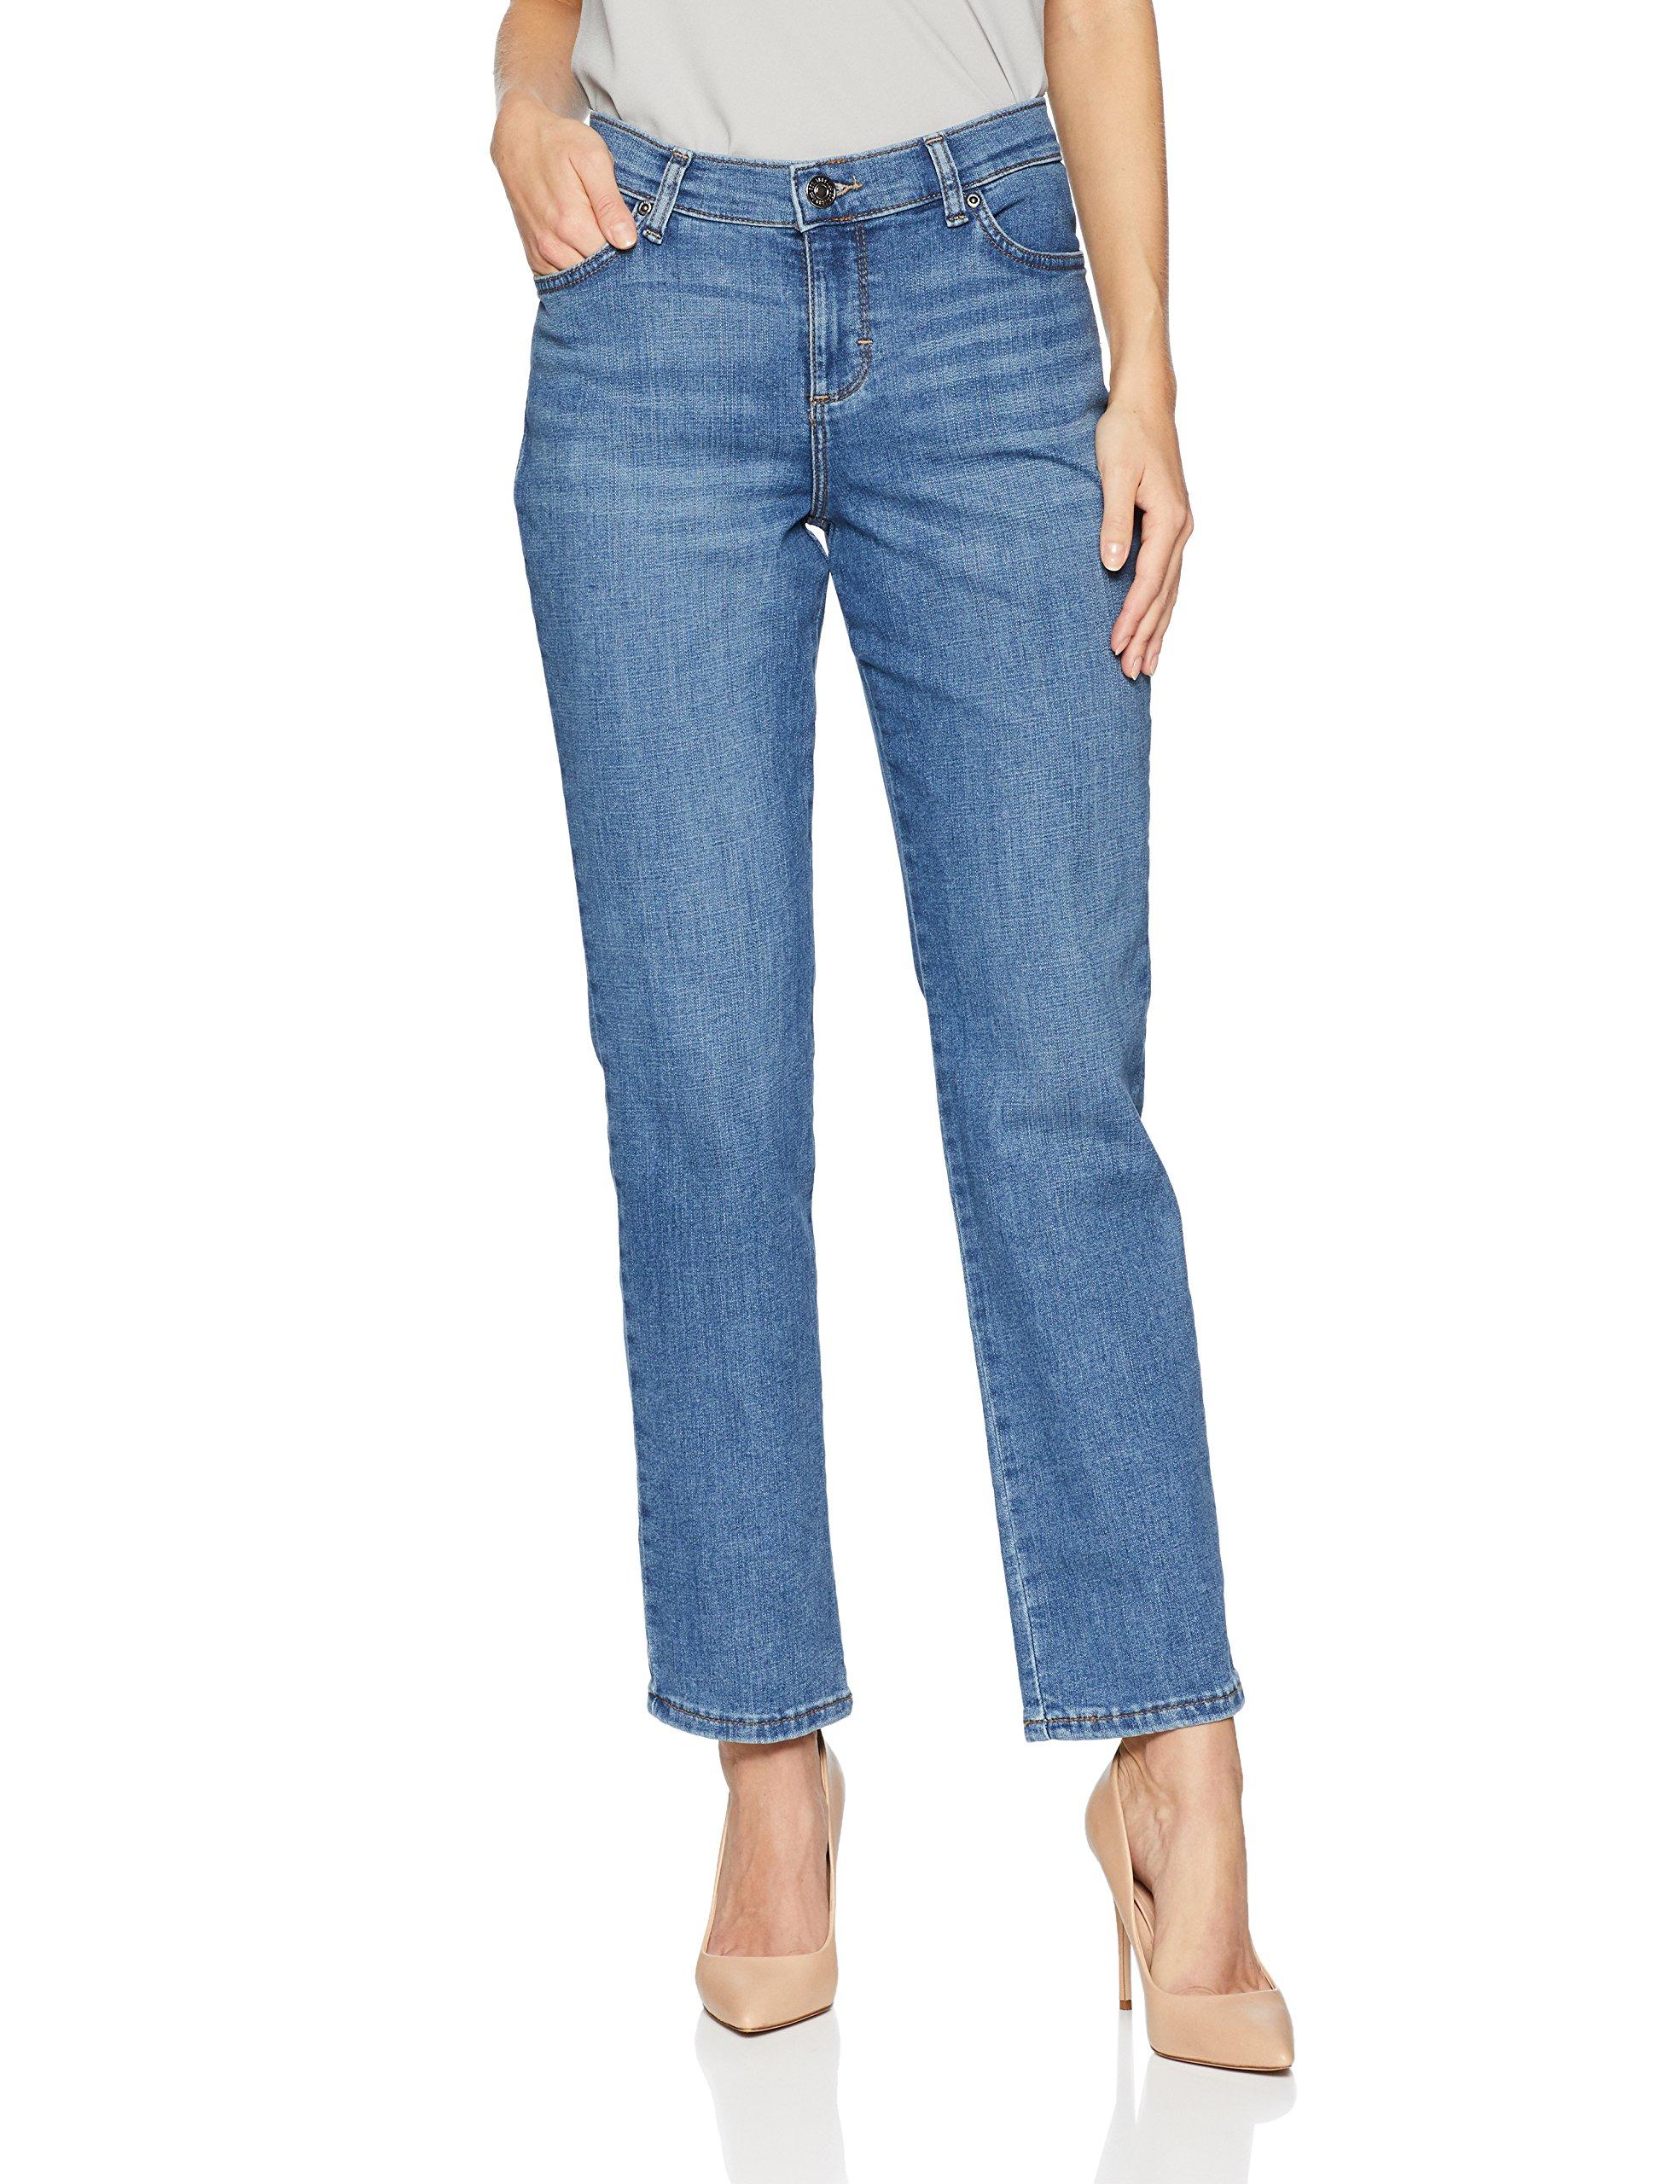 Lee Jeans Denim Relaxed Fit Straight Leg Jean in Blue - Save 27% - Lyst